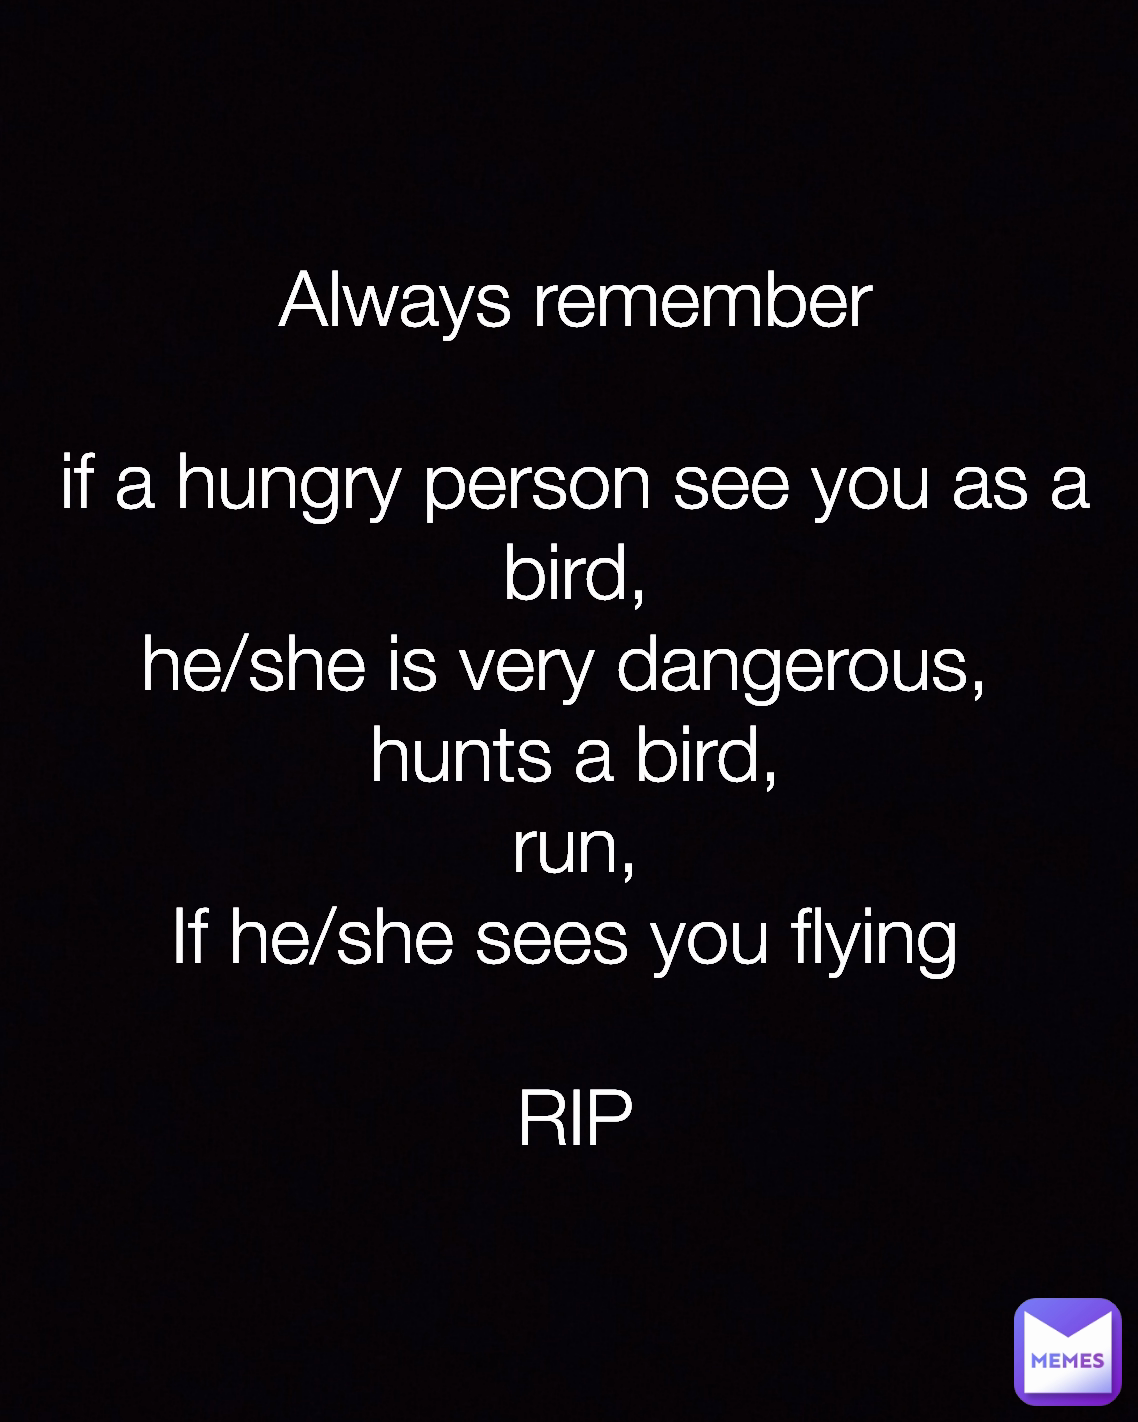 Type Text Always remember

if a hungry person see you as a bird,
he/she is very dangerous, 
hunts a bird,
run,
If he/she sees you flying 

RIP